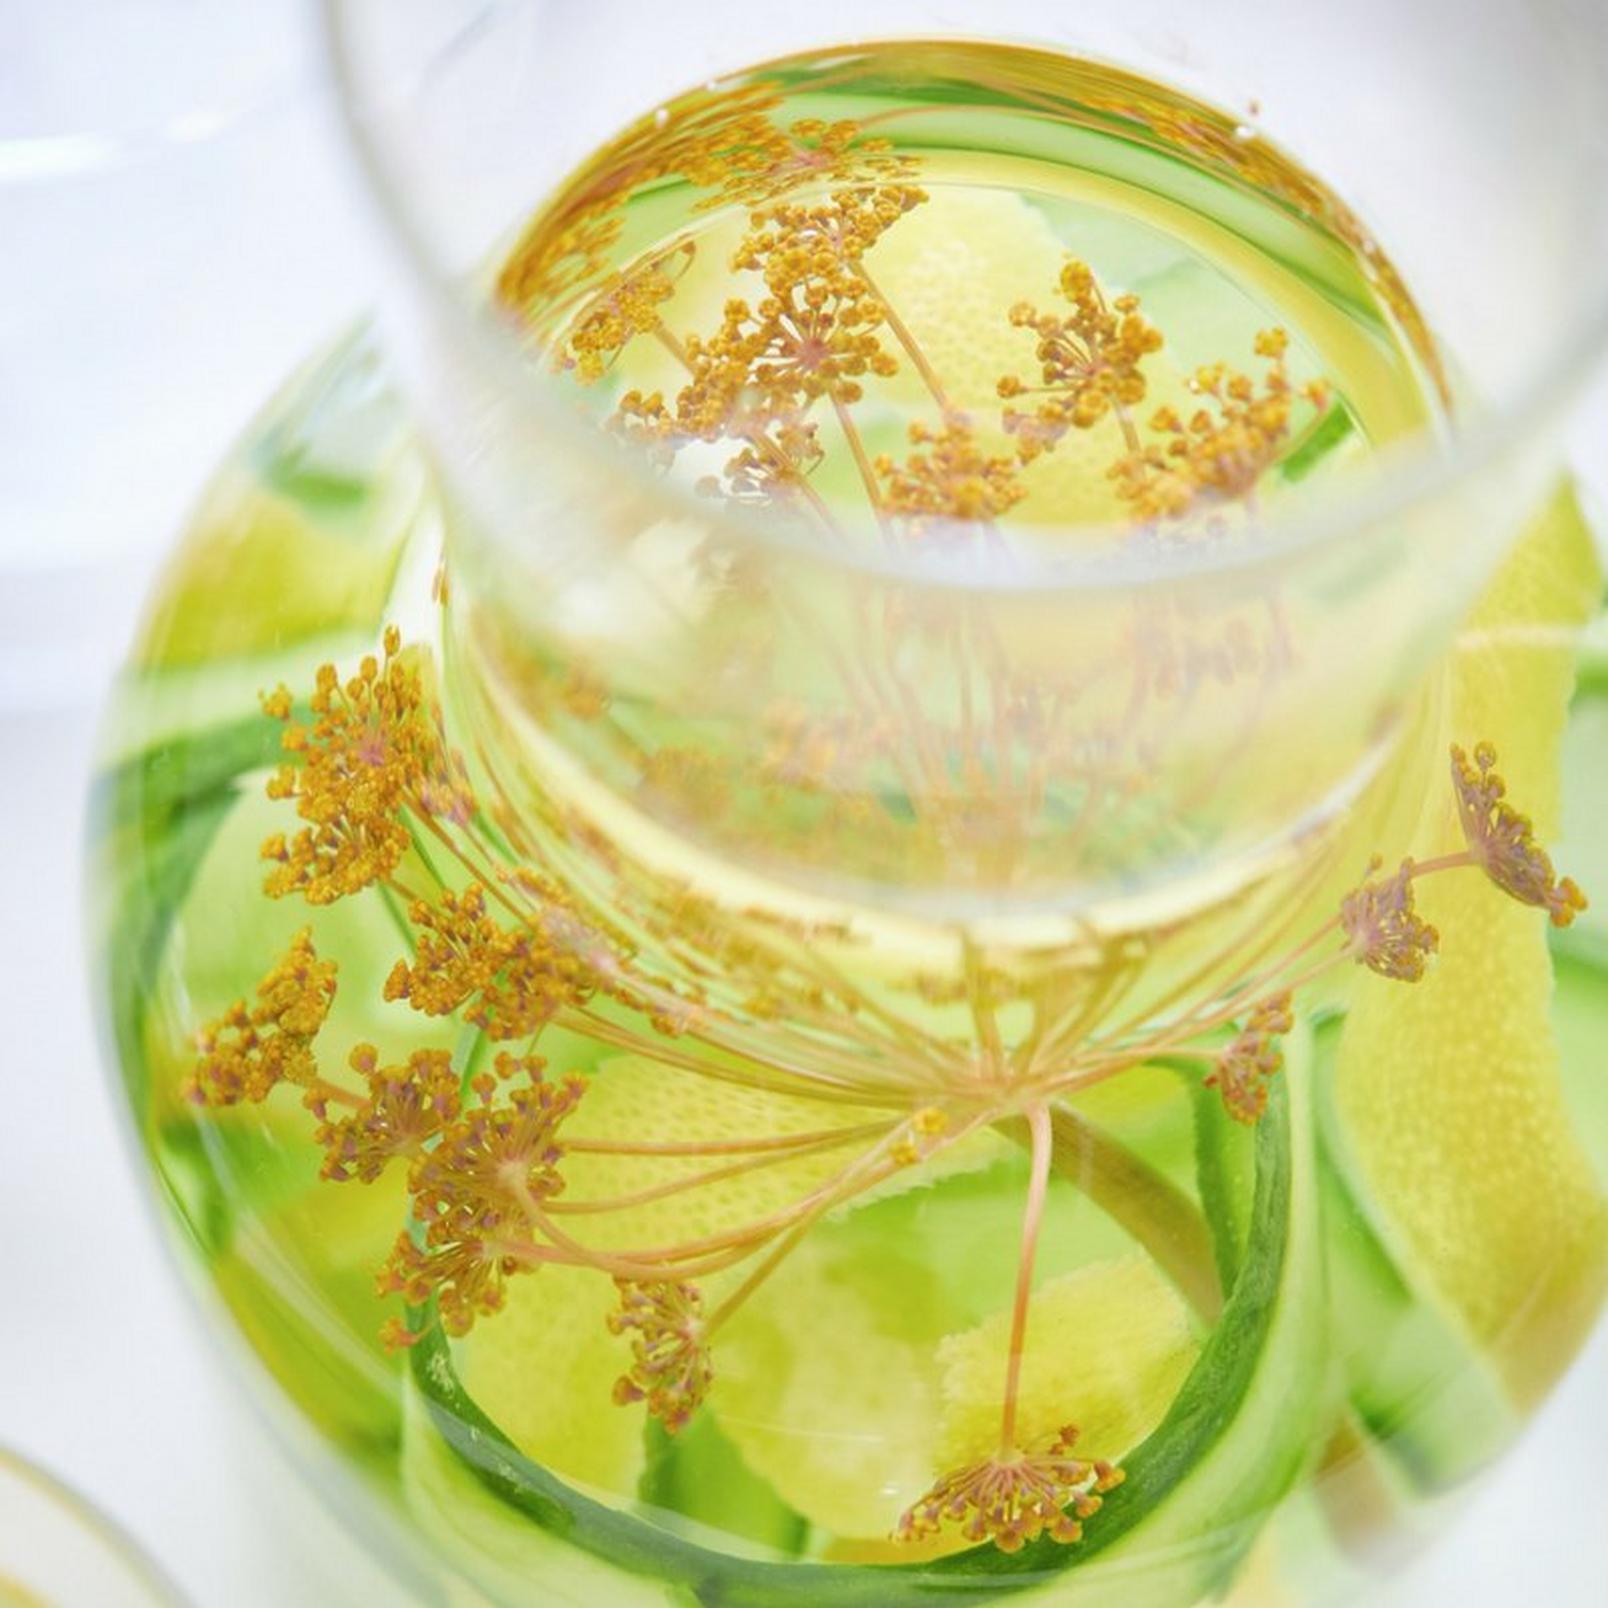 Cucumber-lemon-and-fennel-flower-gin-cocktail-close-up